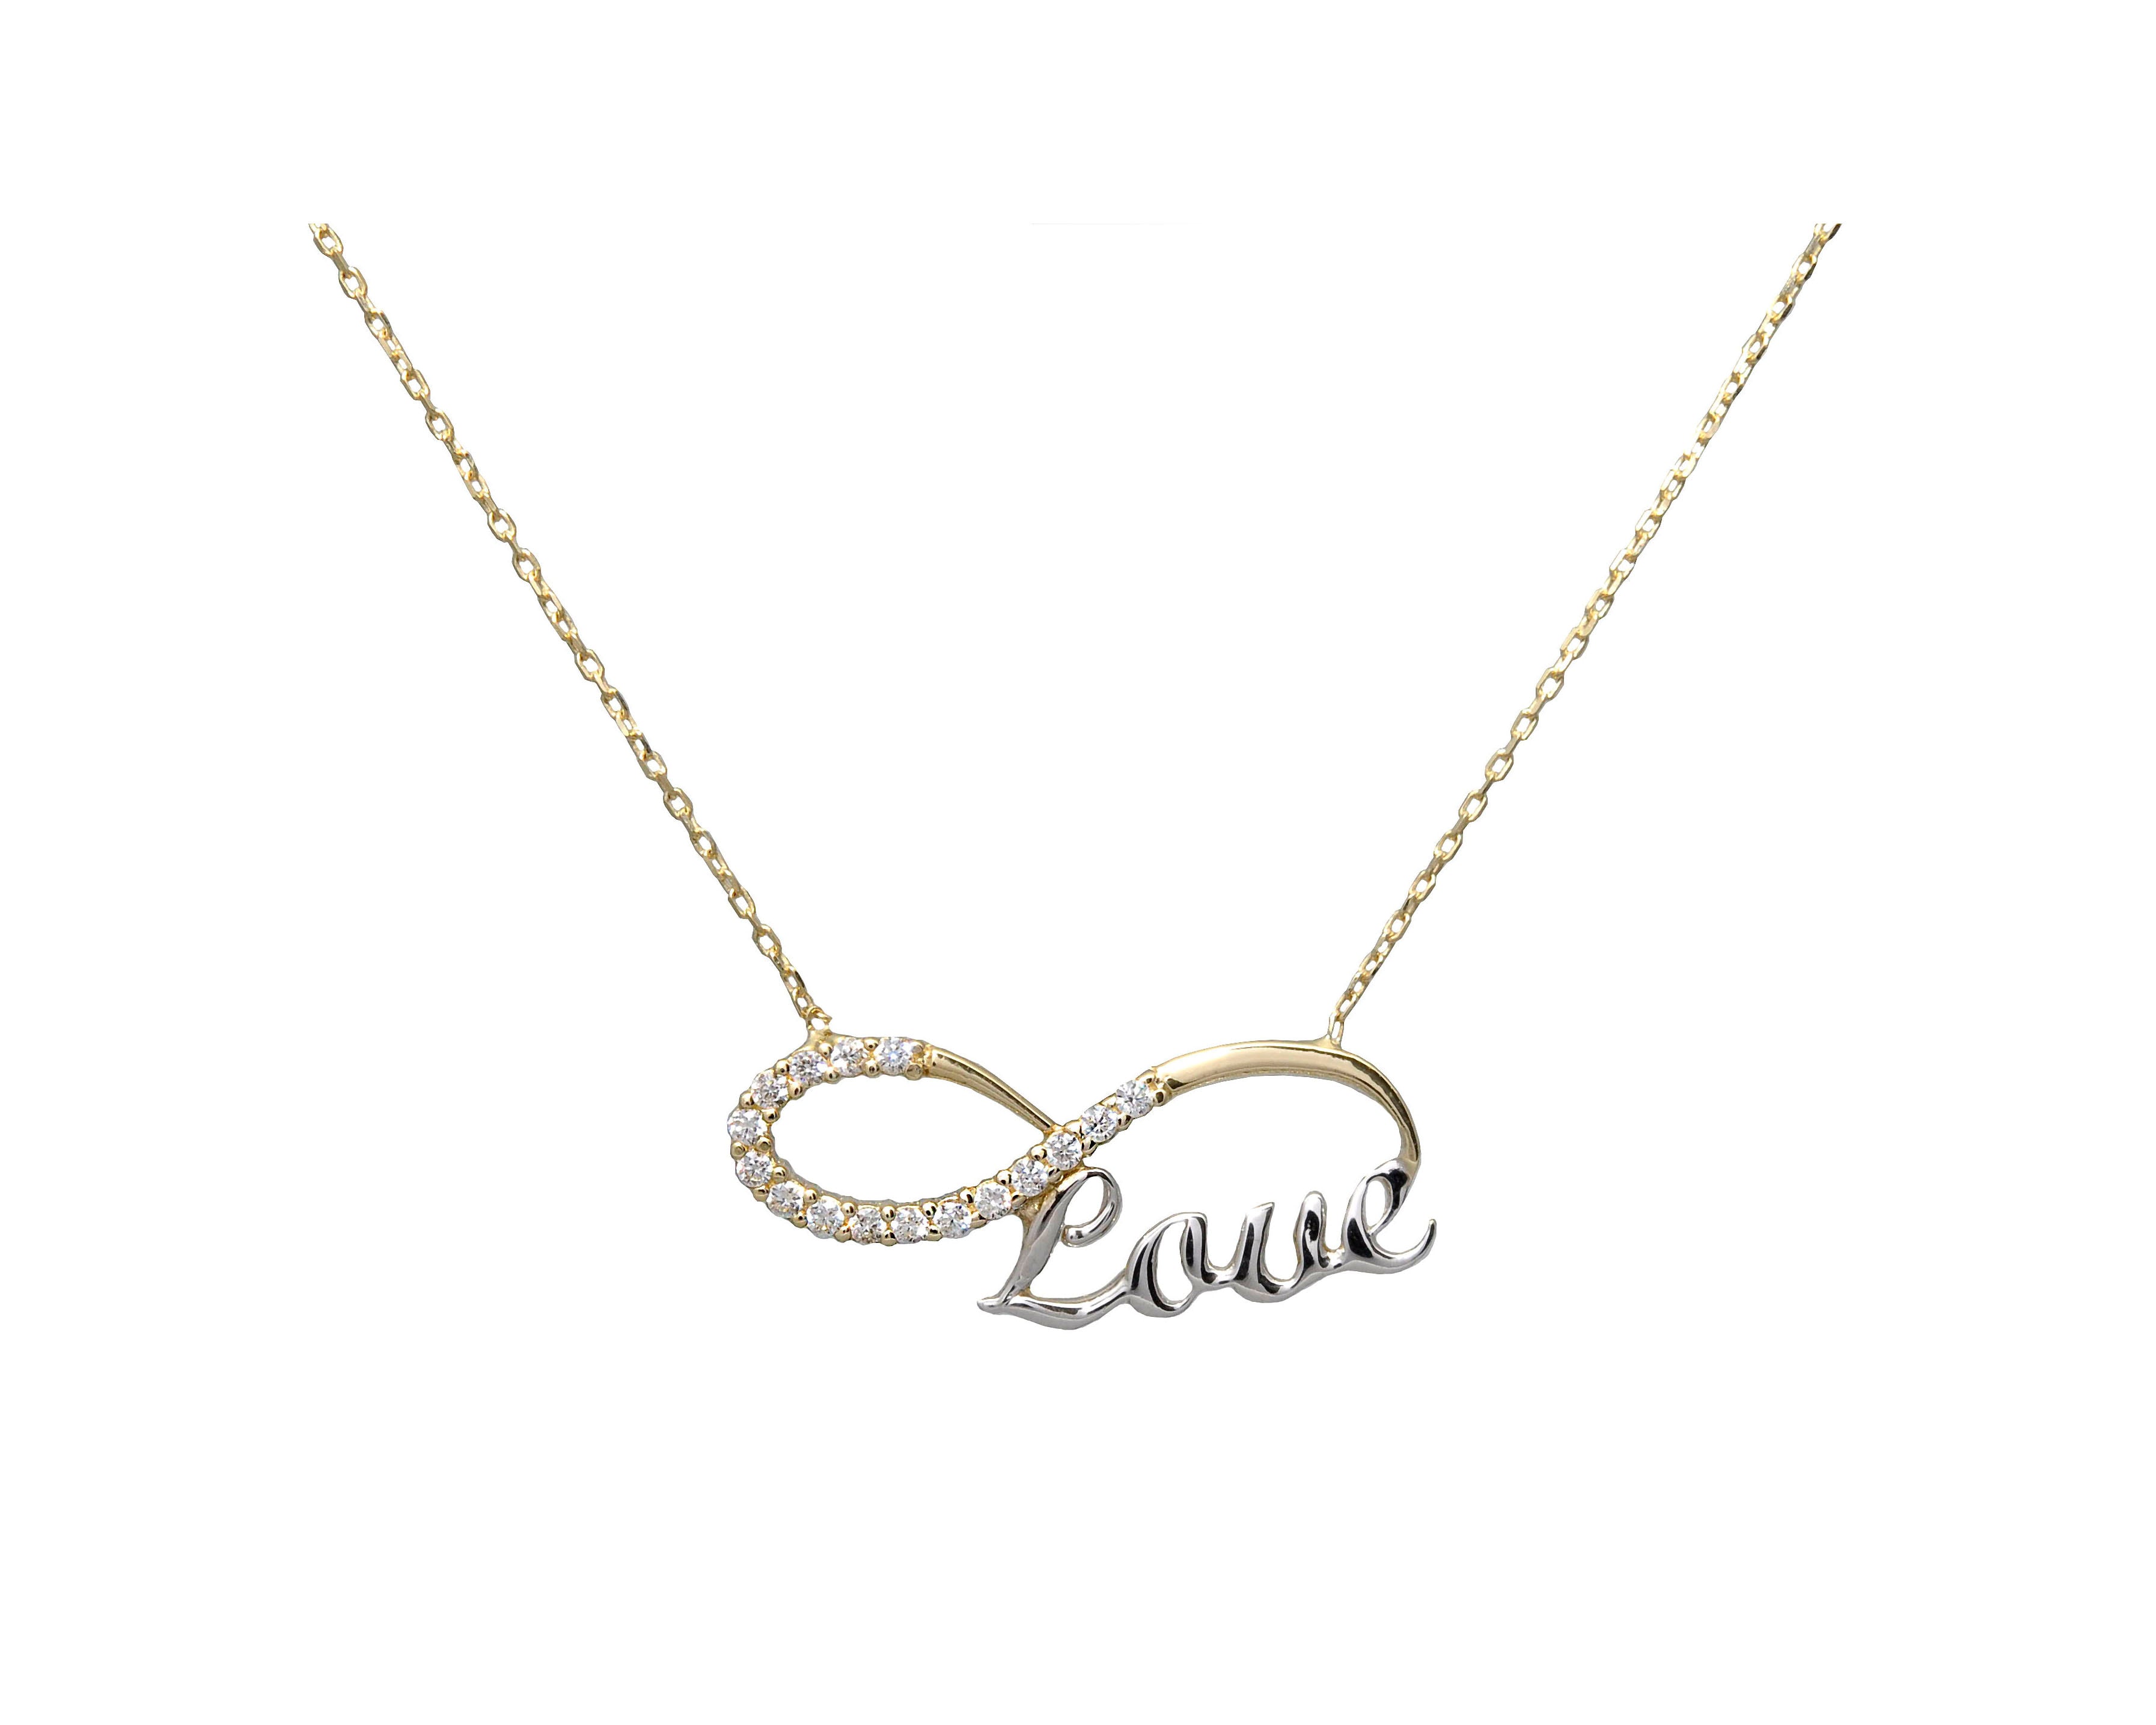 Infinity love necklace in 14K yellow gold, 'Love' in 14K white gold, decorated with diamond-cut zirconia.